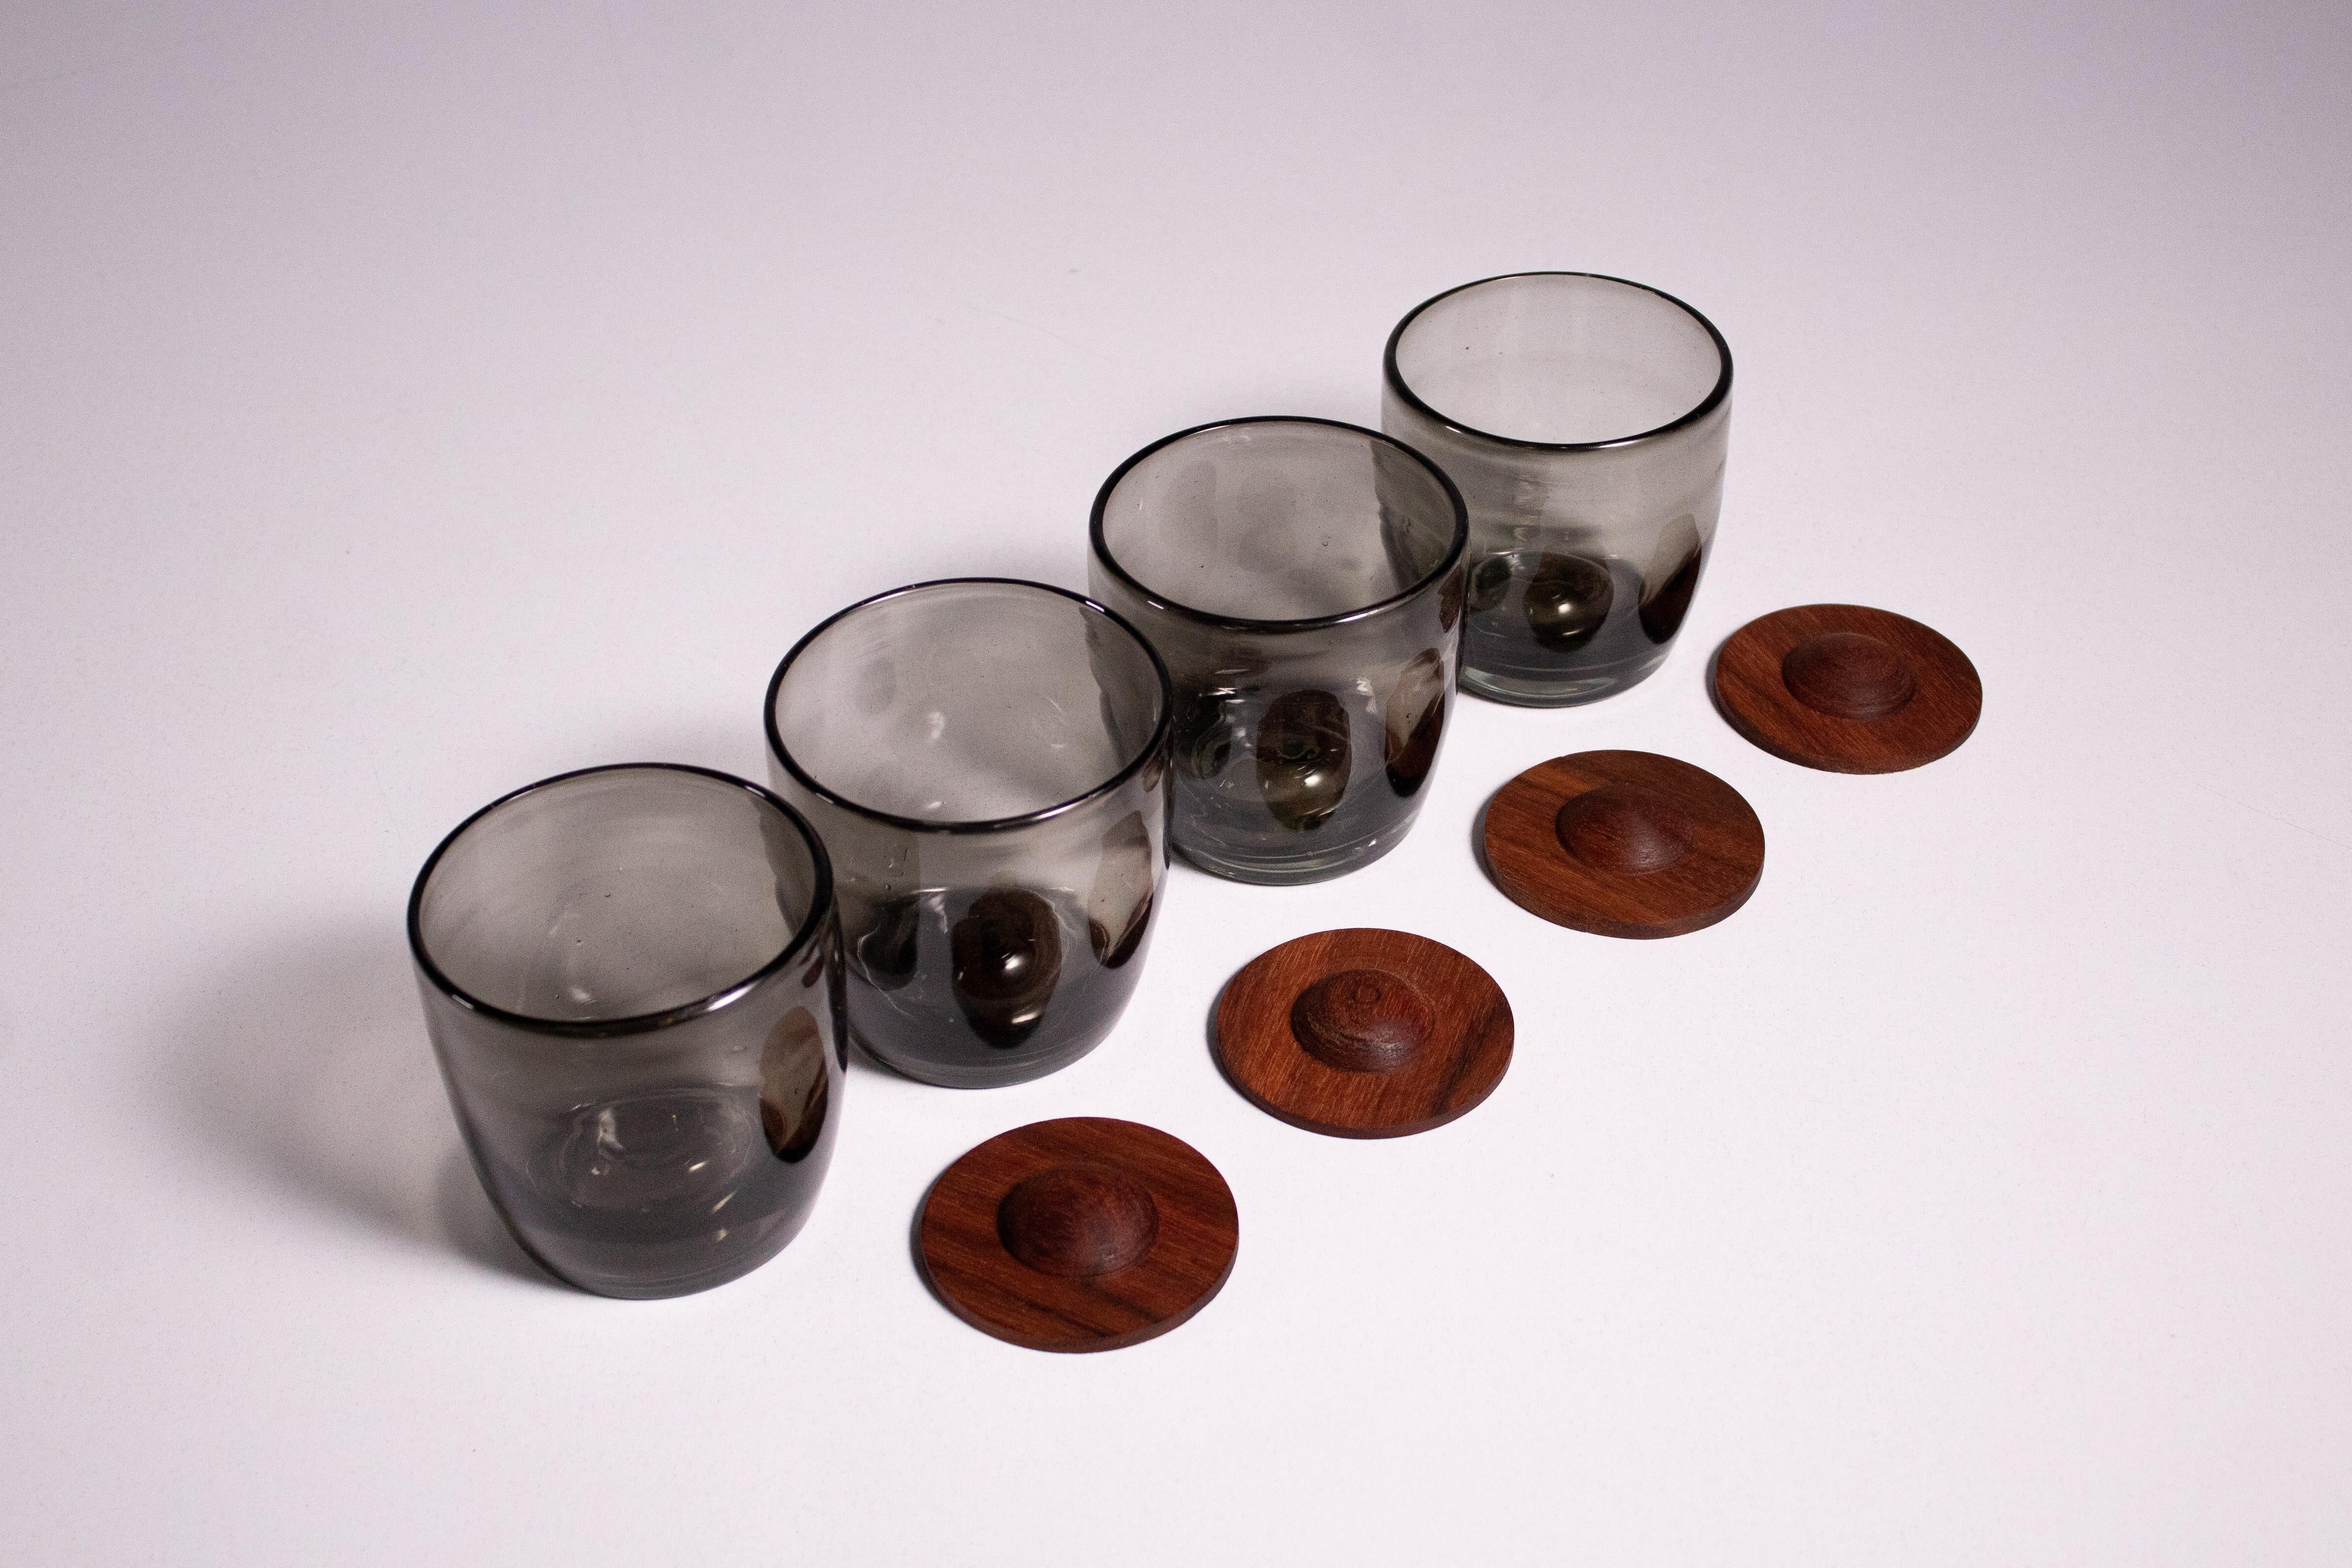 4 Piece Set of Smoke Hand Blown Glasses with Parota Wood Coasters In New Condition For Sale In Zapopan, Jalisco. CP